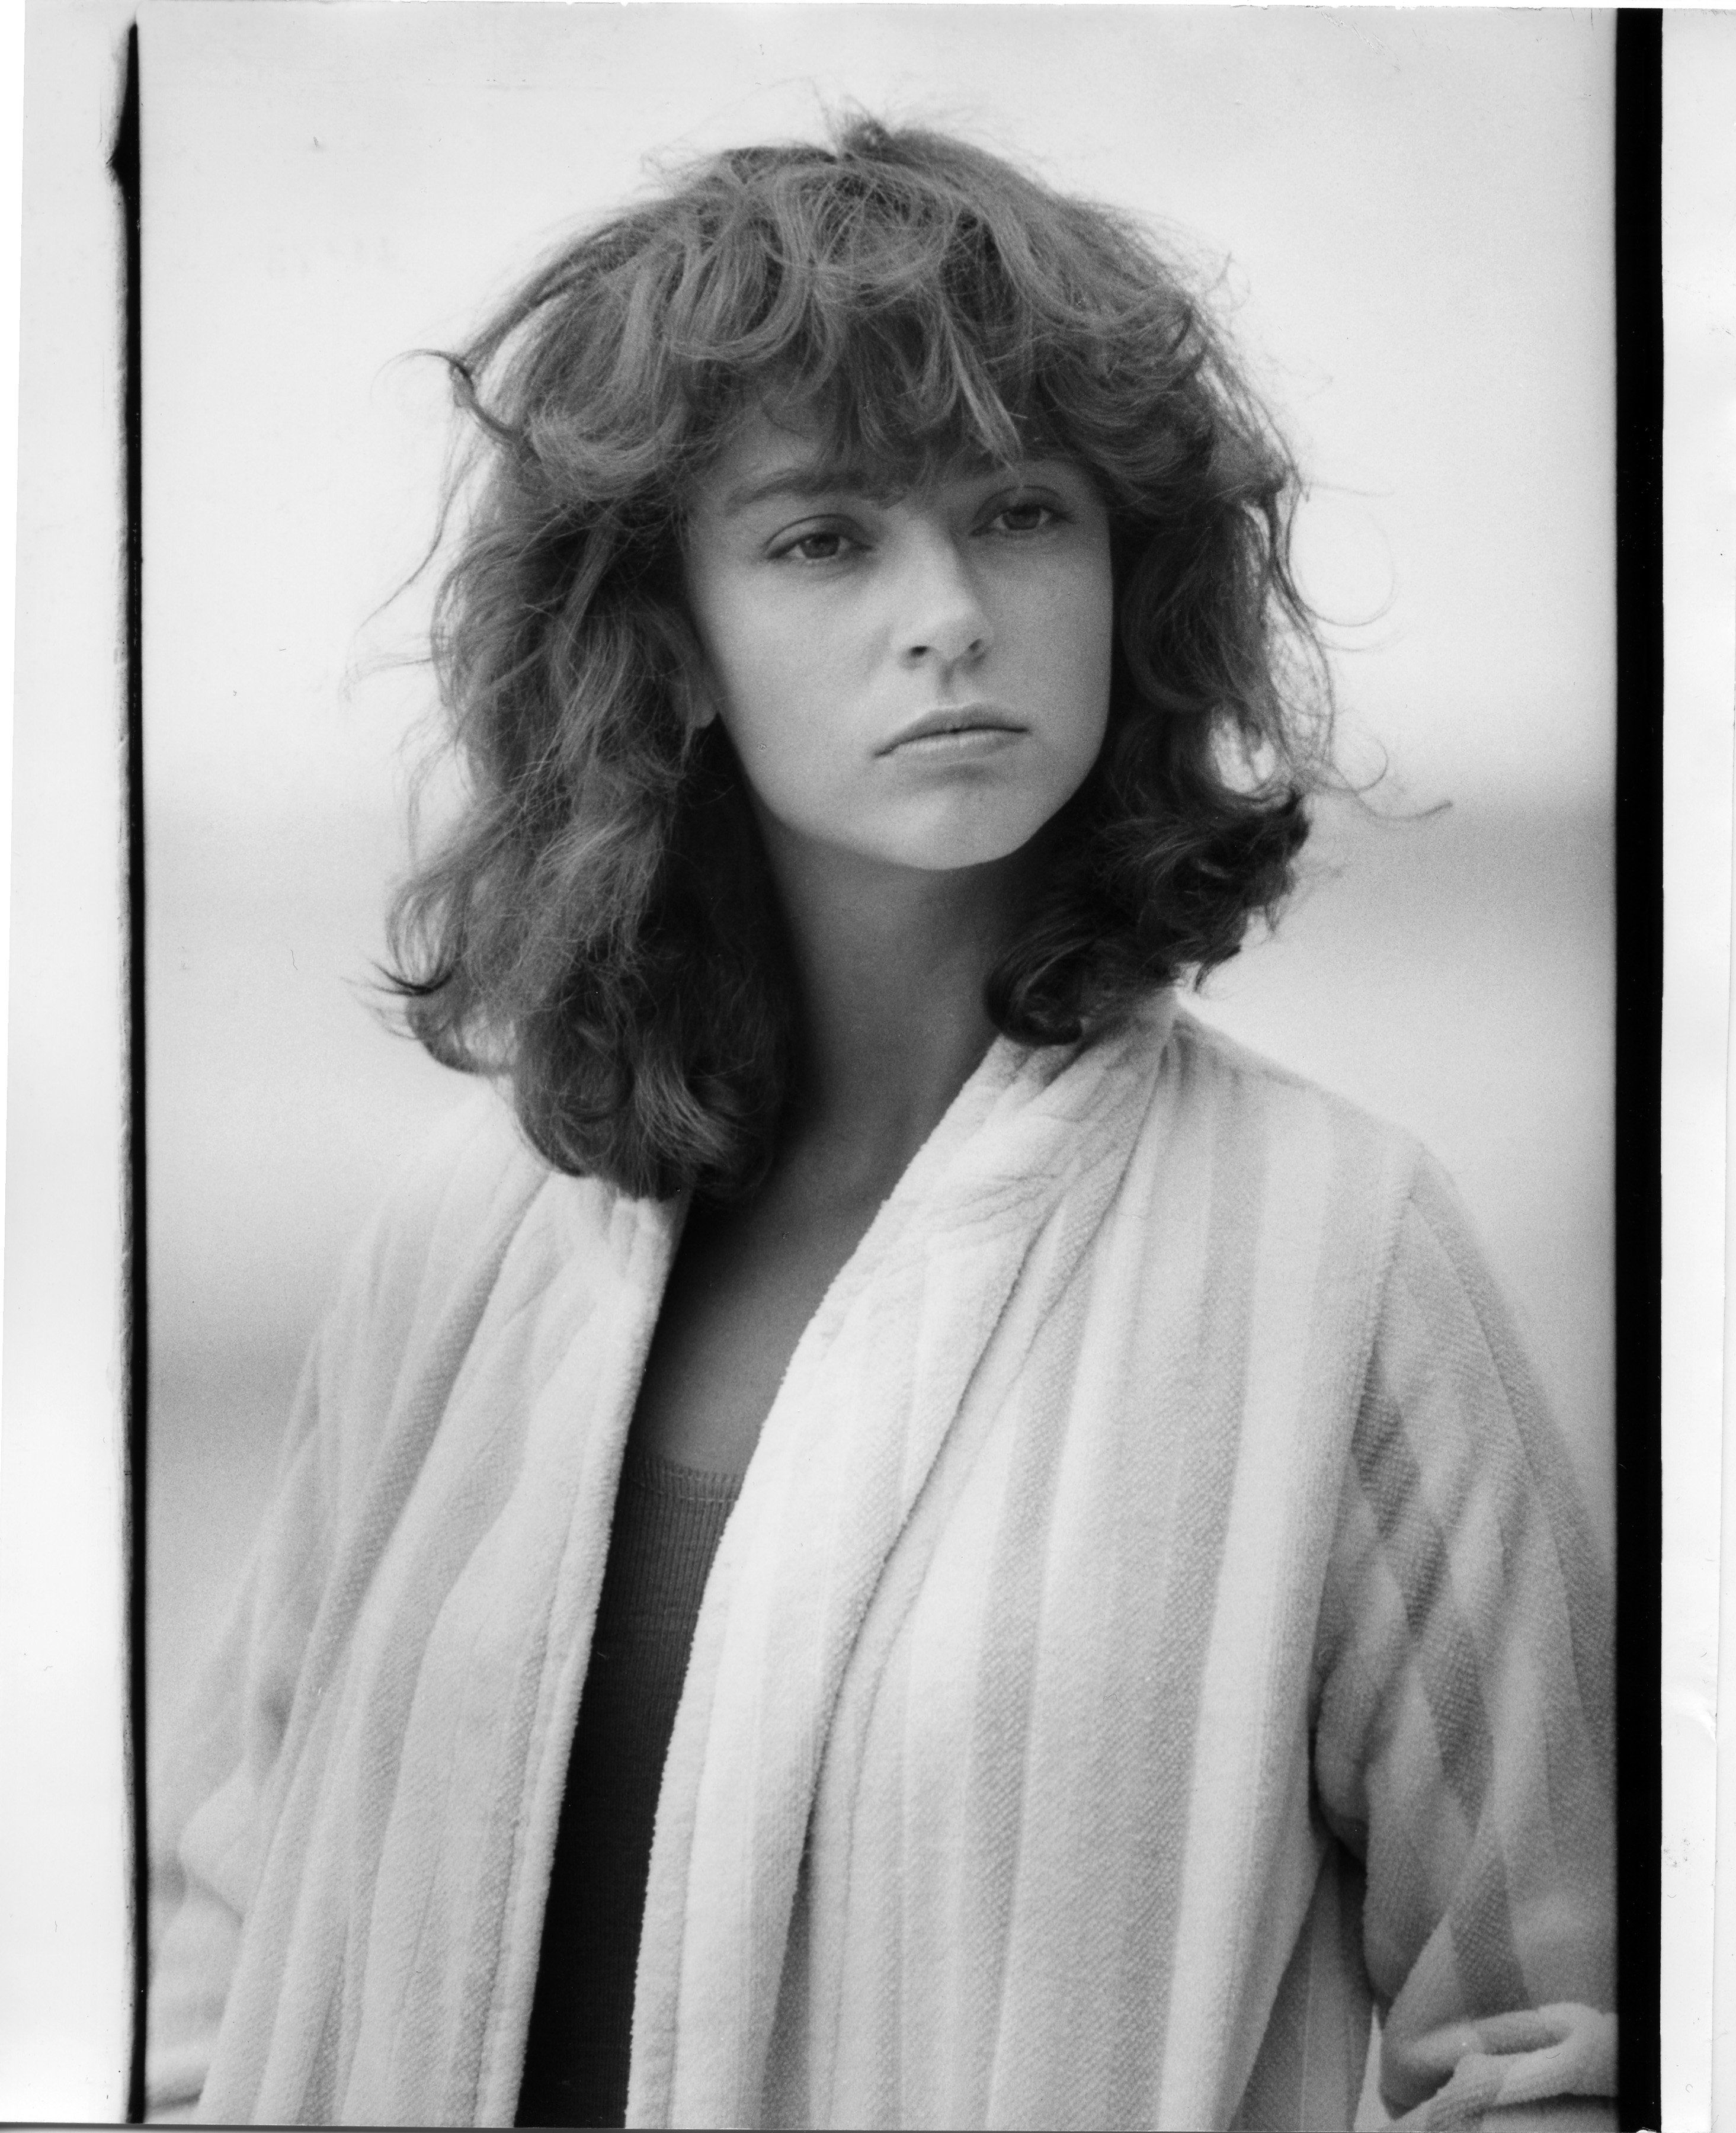 Rachel Ward on the TV miniseries, "The Thorn Birds" which aired March 27 through 30, 1983. | Source: Getty Images